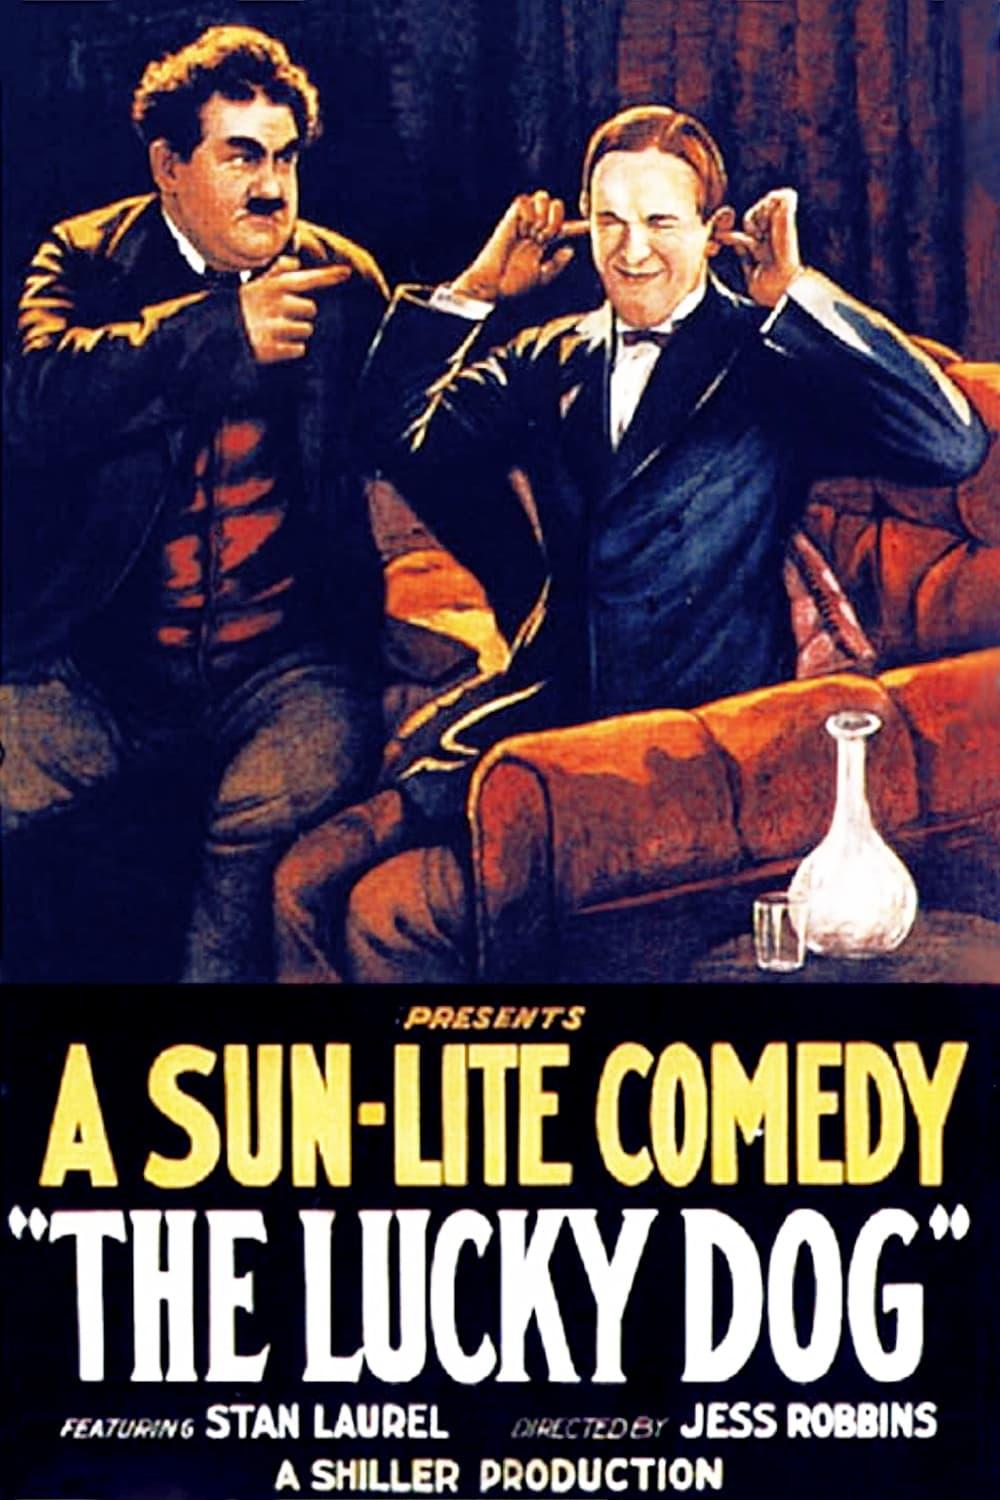 The Lucky Dog poster